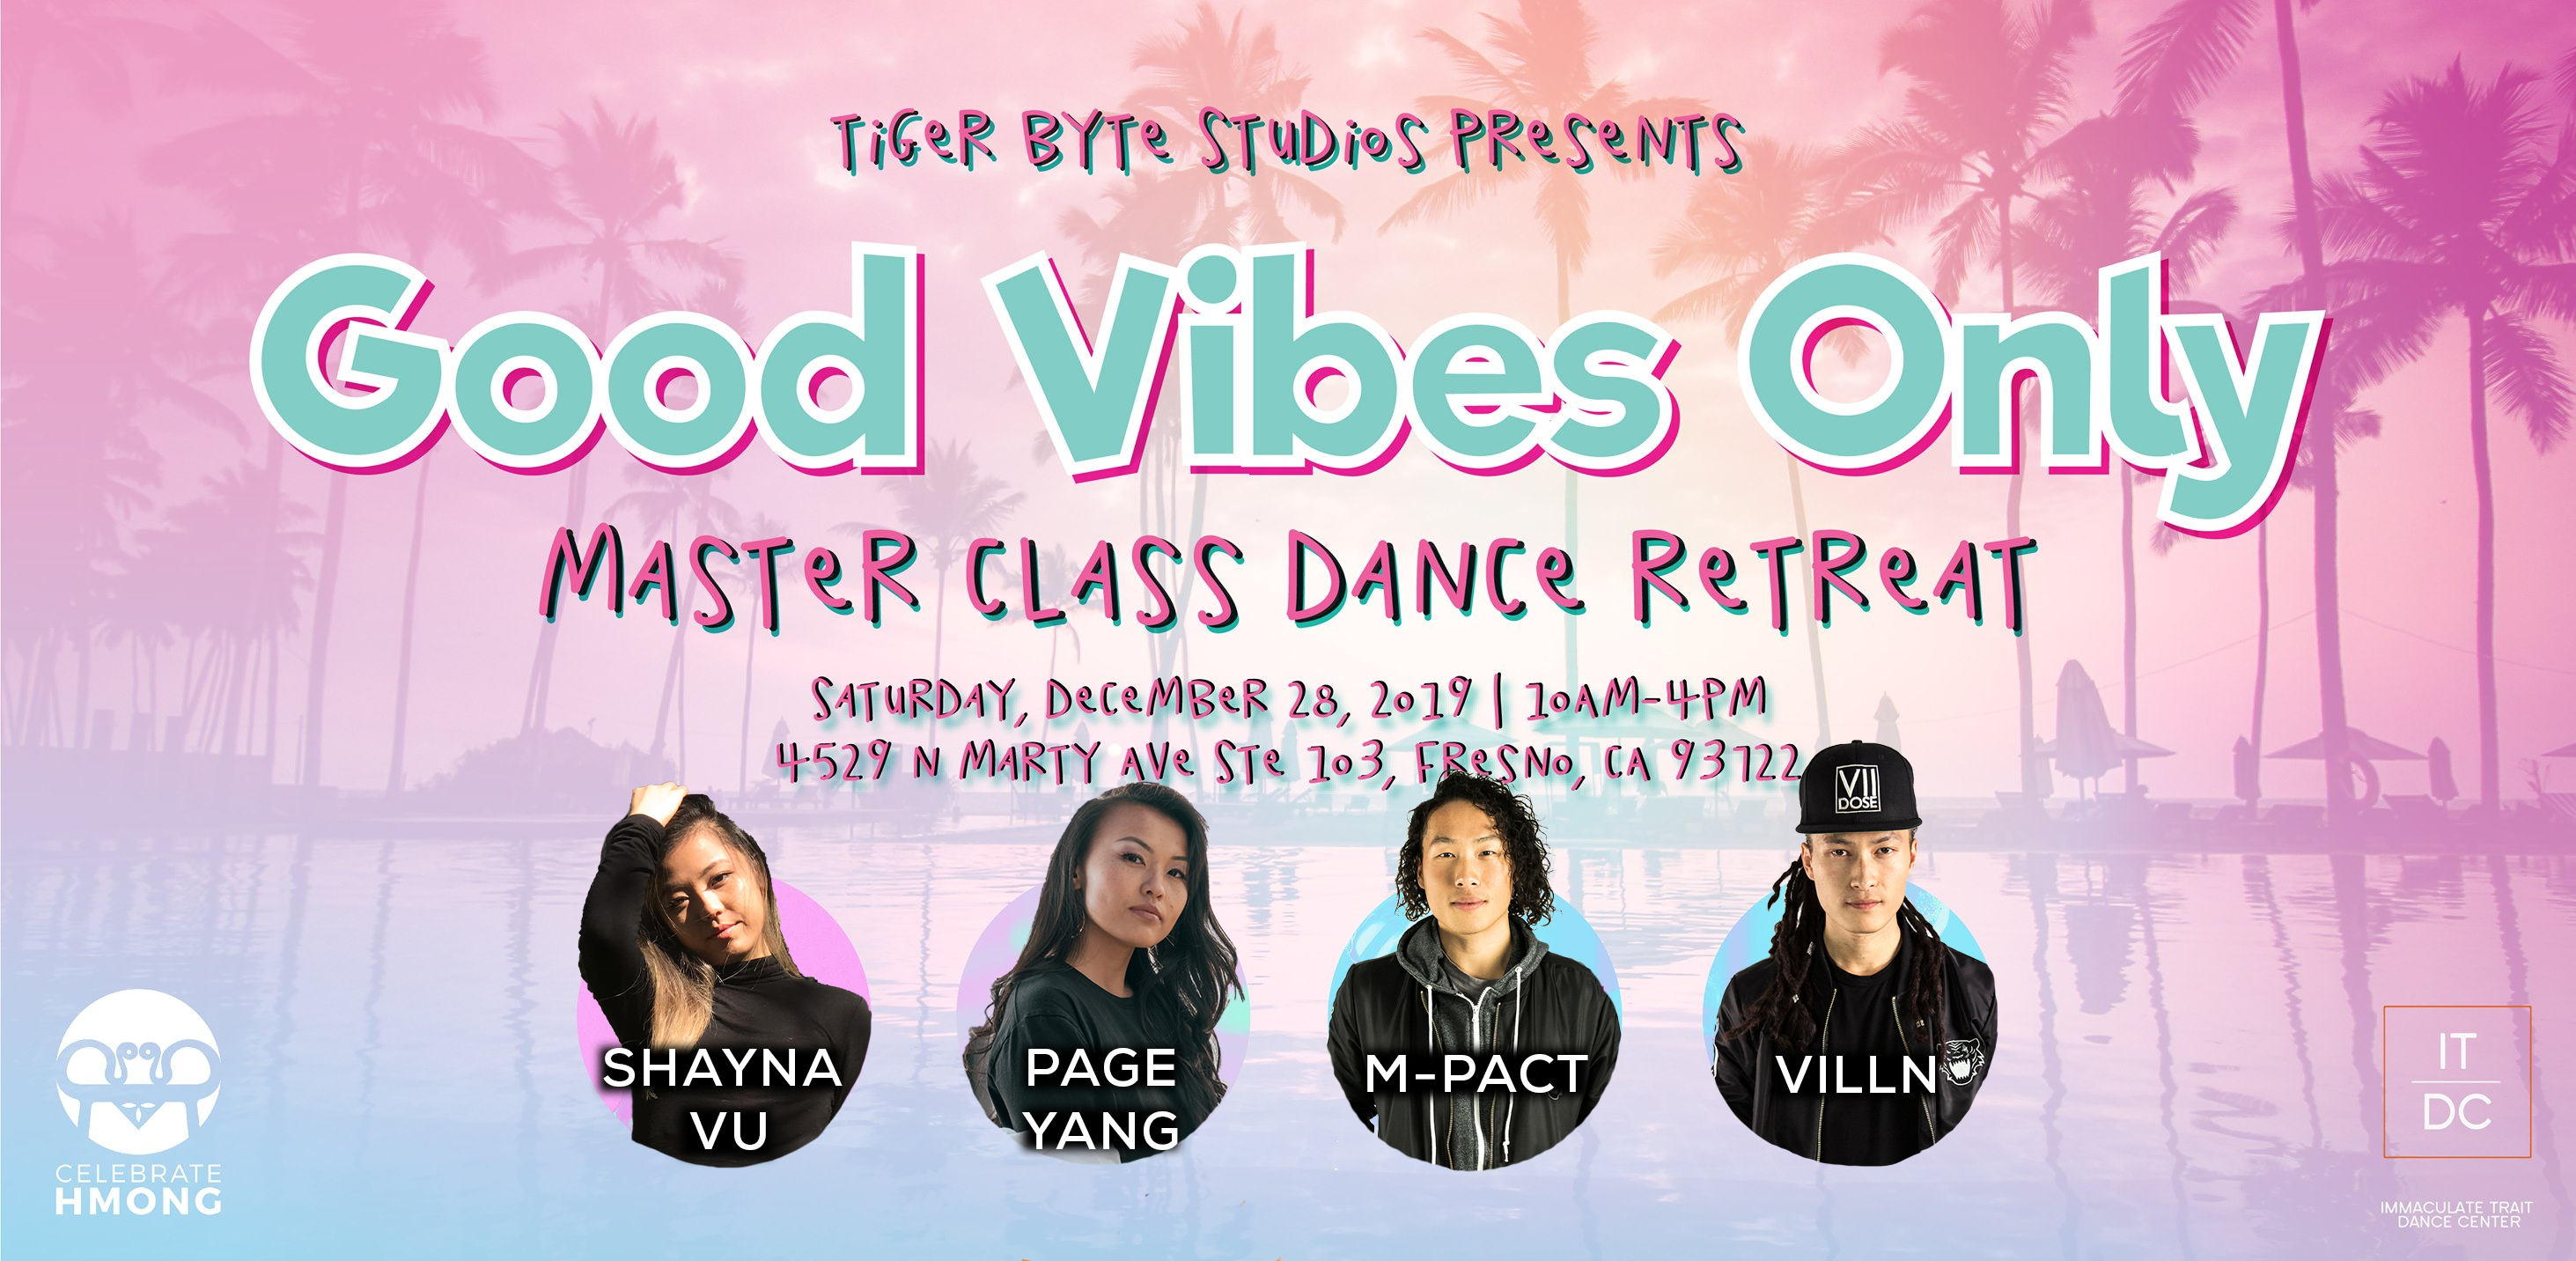 Good Vibes Only Master Class Dance Retreat